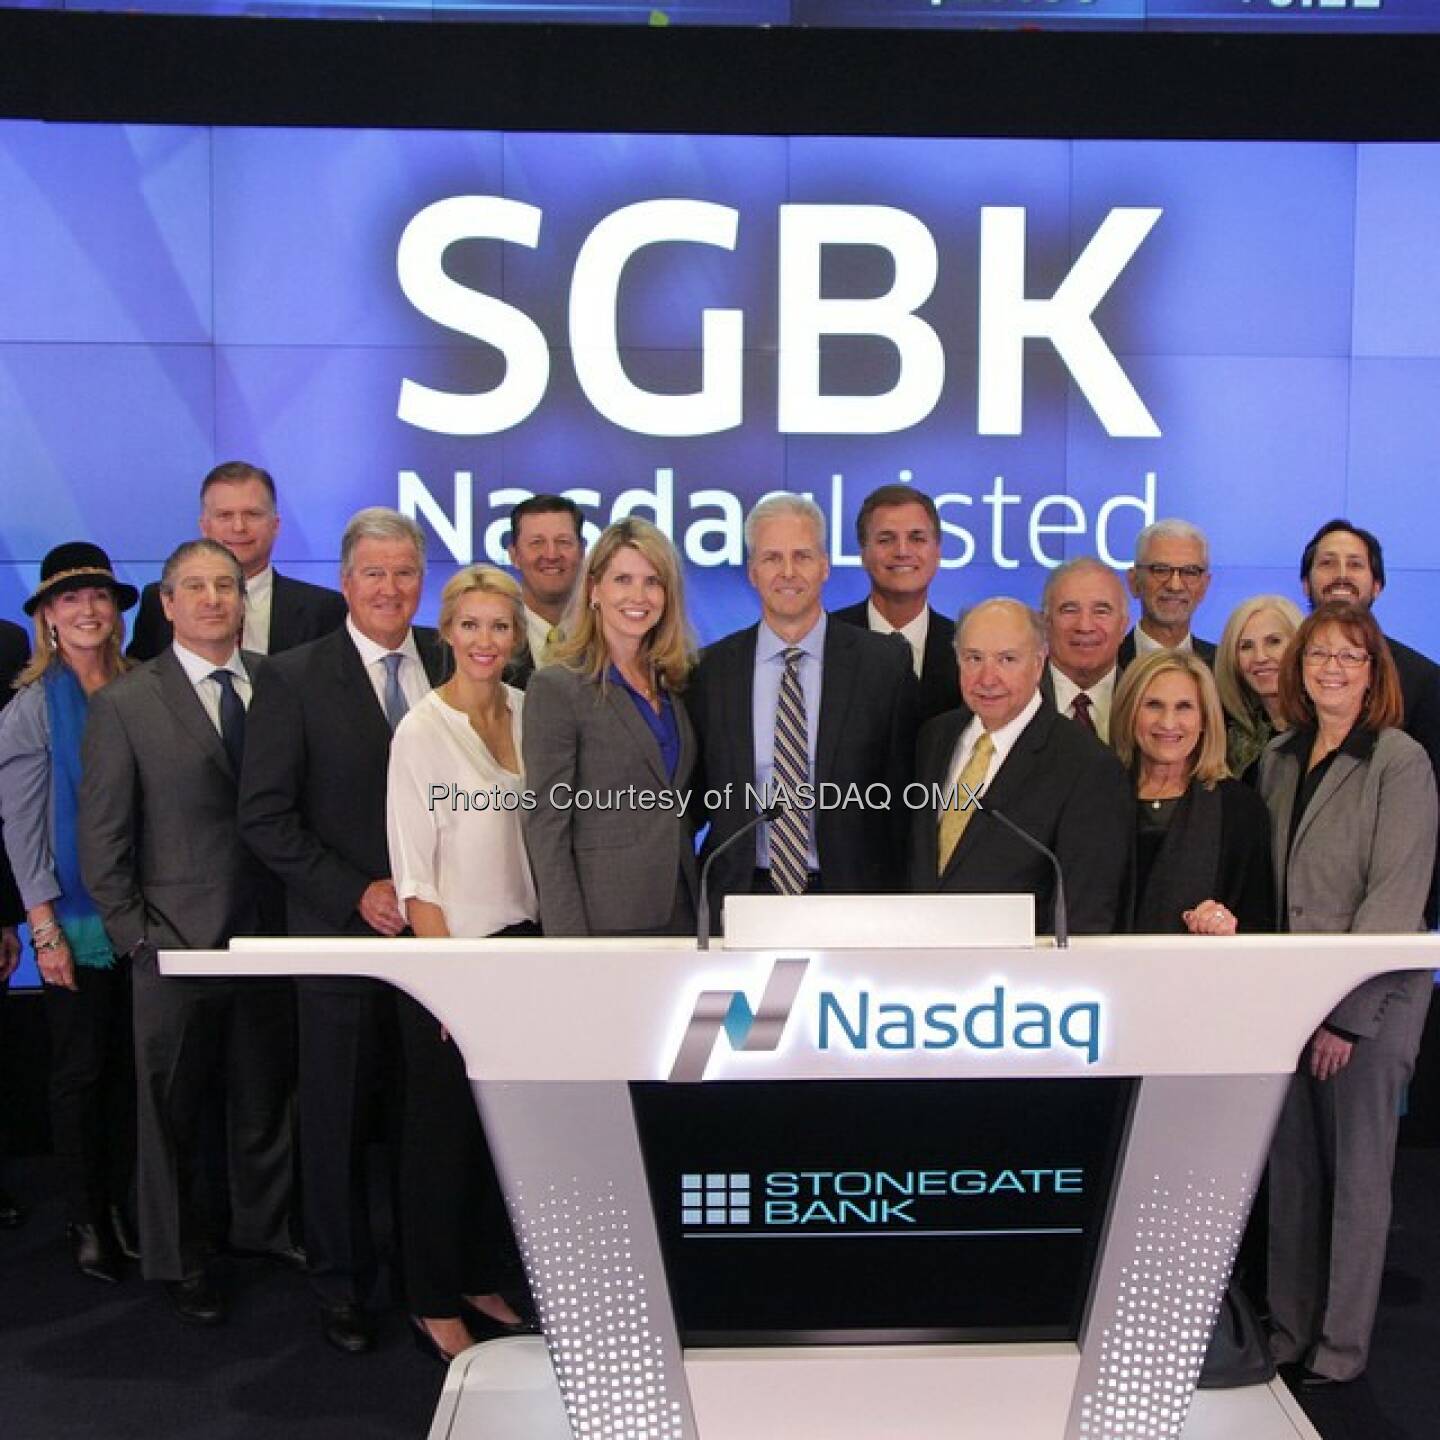 Getting ready for #Stonegate Bank to ring the #Nasdaq Closing Bell! $SGBK #CommunityBank  Source: http://facebook.com/NASDAQ